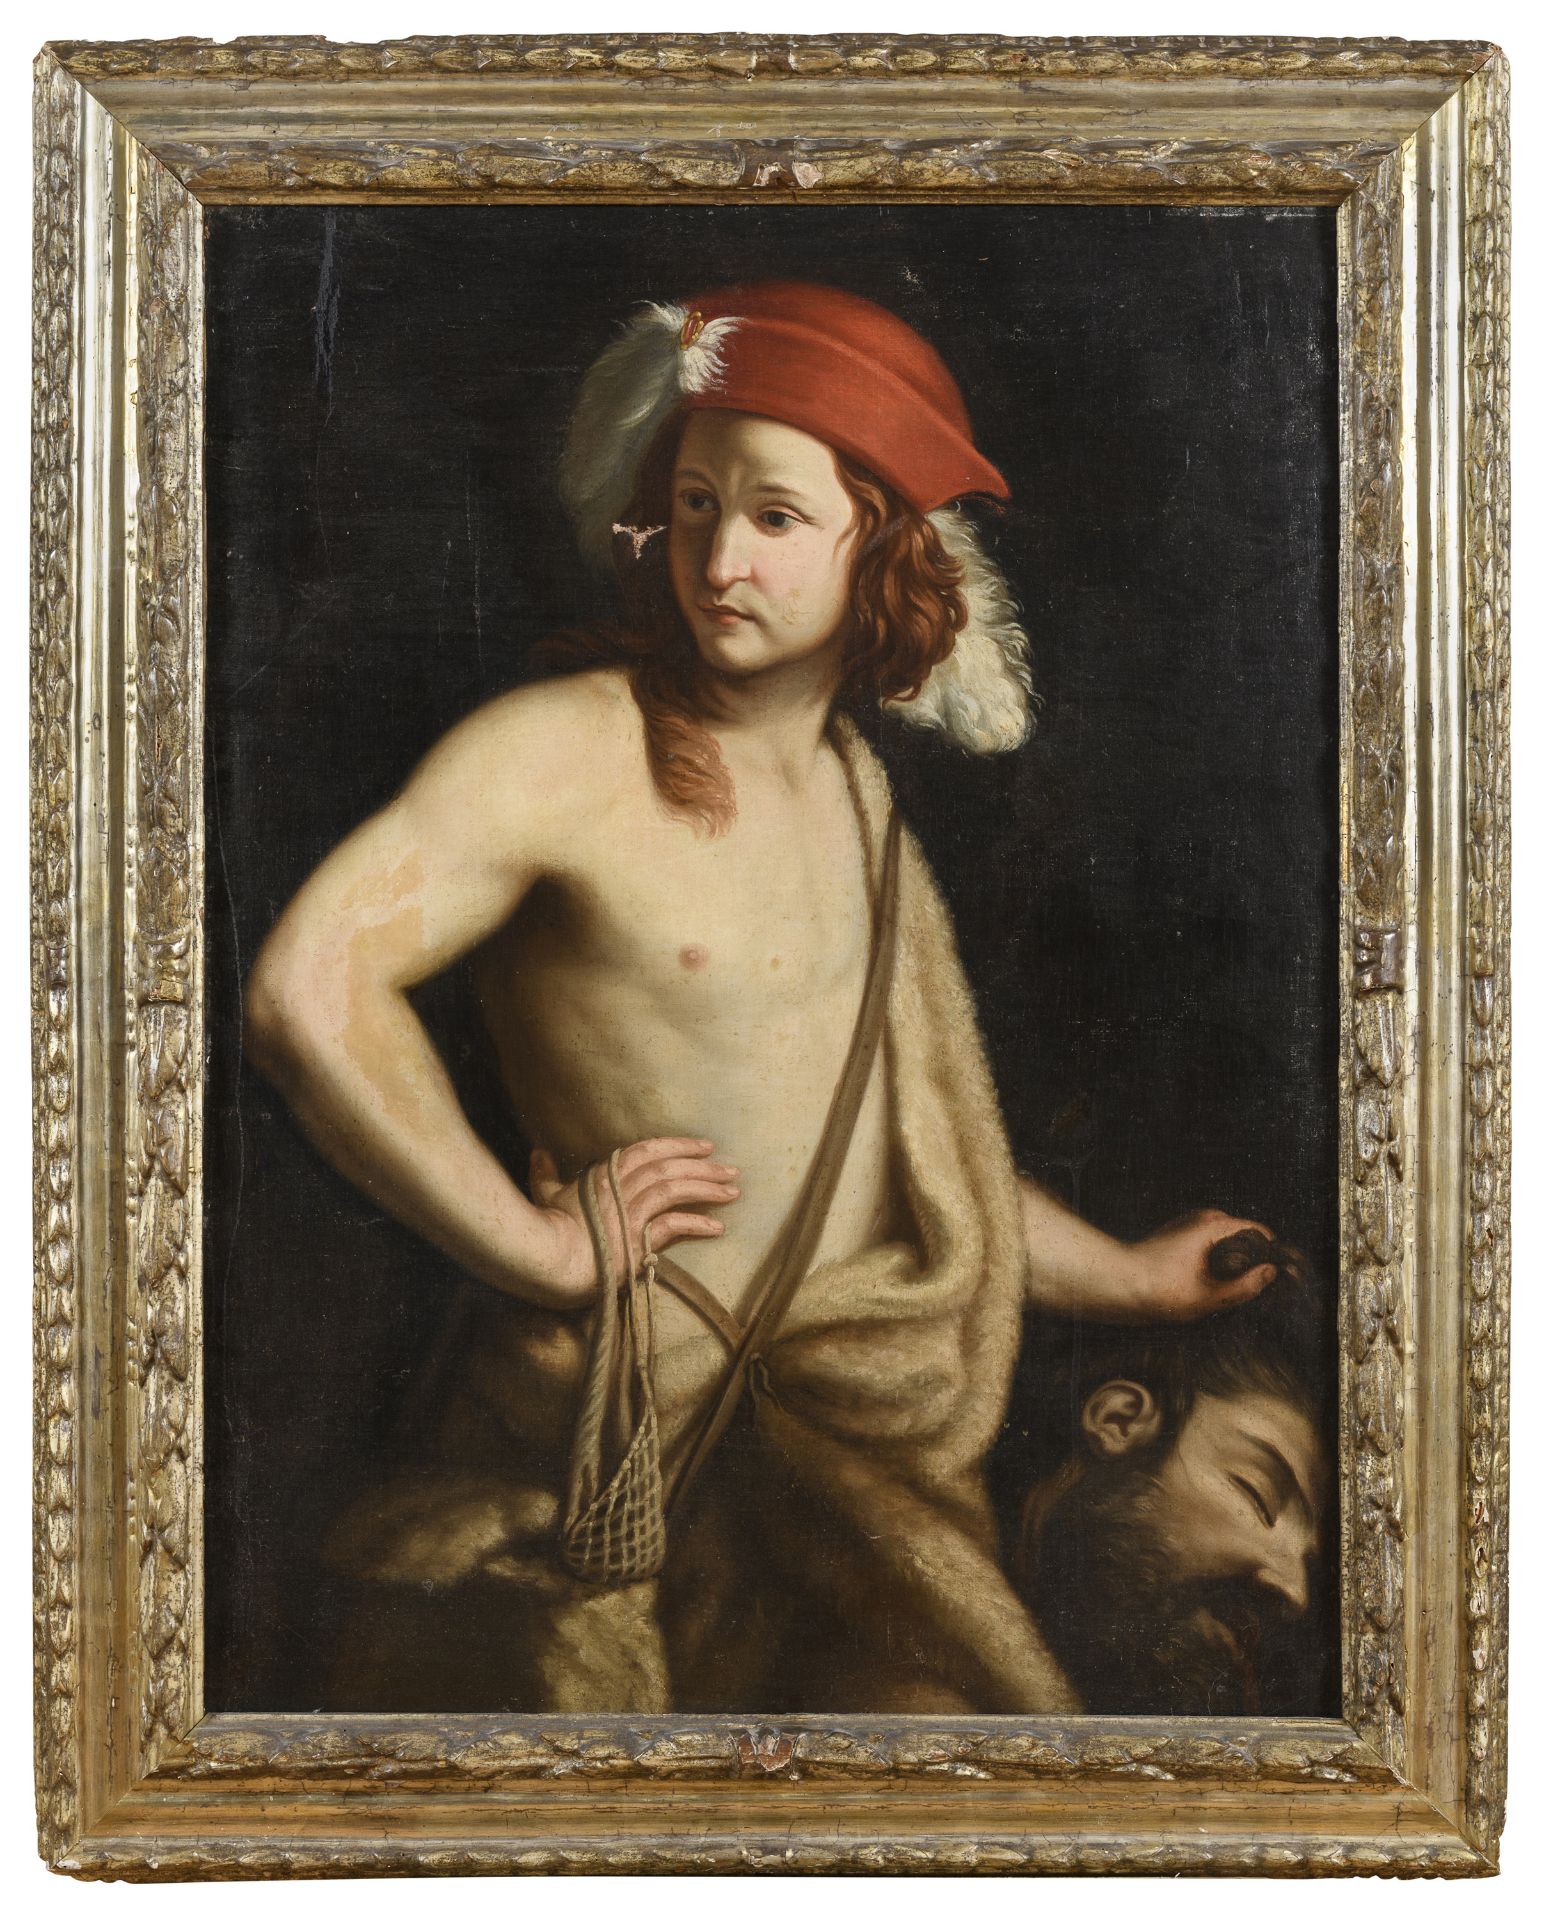 OIL PAINTING BY FOLLOWER OF GUIDO CAGNACCI